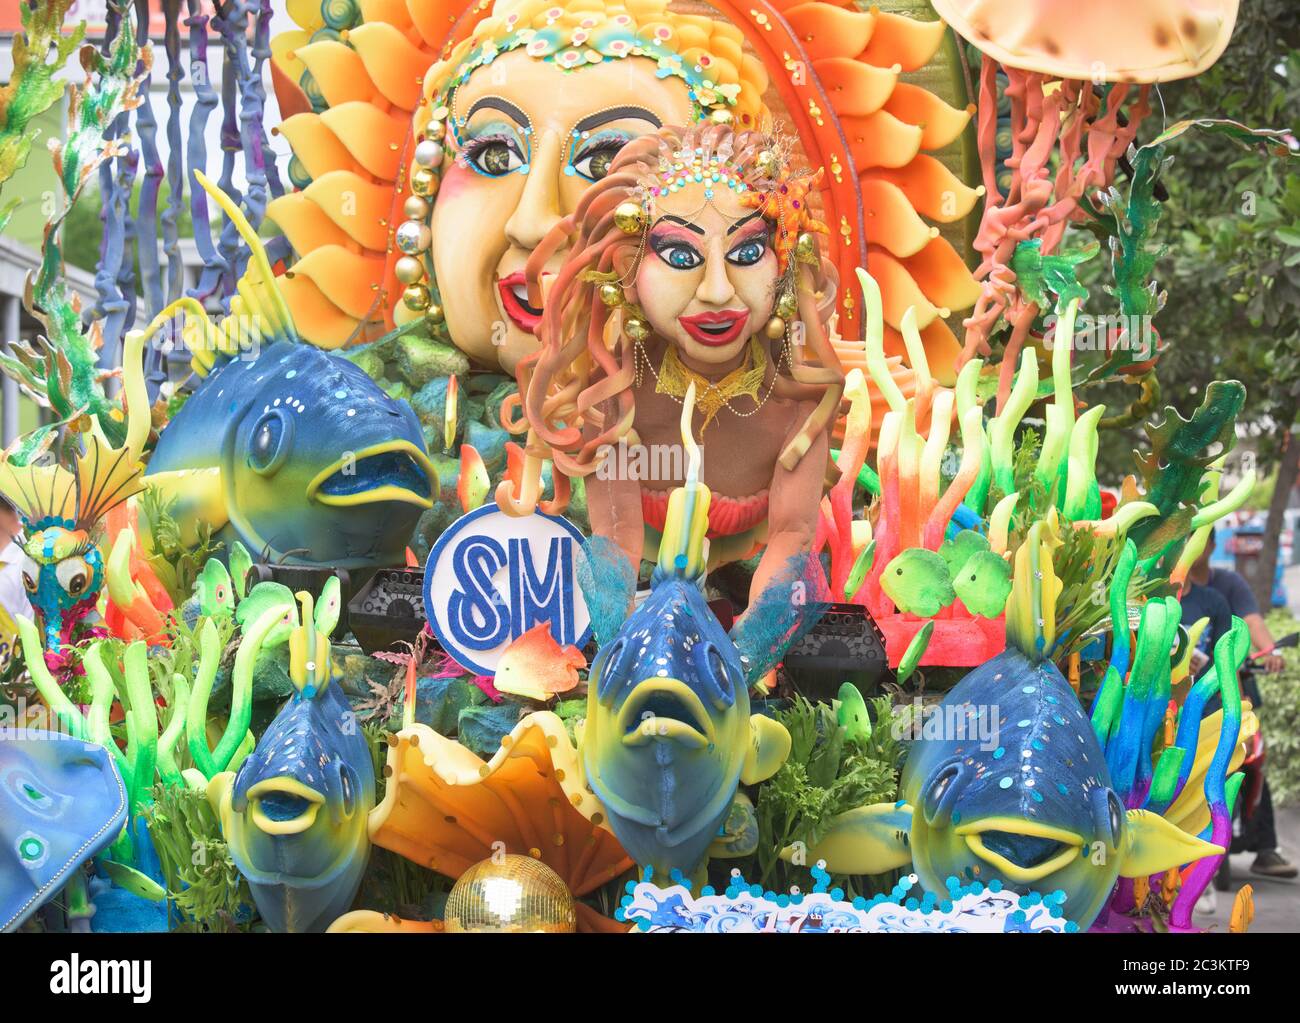 The Float Parade at General Santos Tuna Festival on 1 September 2015 in General Santos City, the southernmost city of the Philippines. Stock Photo